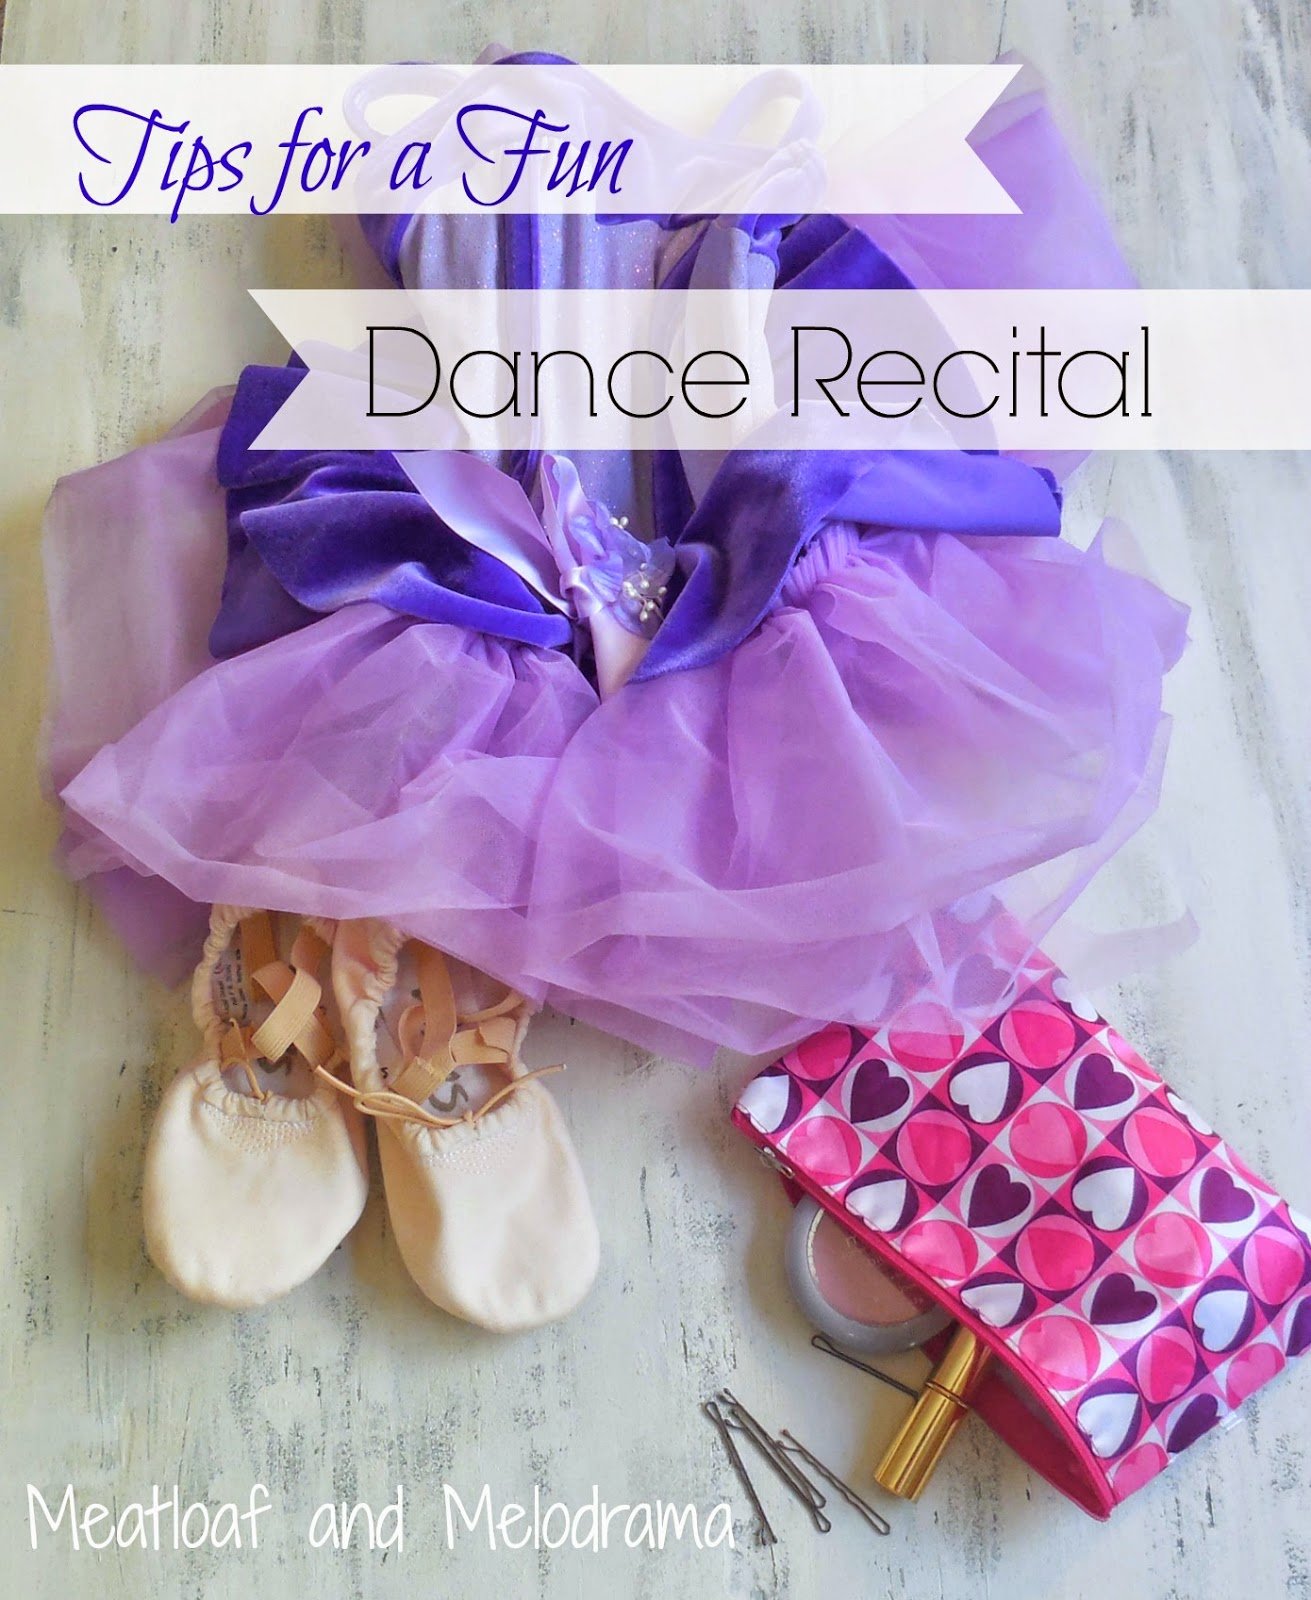 ballet shoes and ballet outfit and makeup bag